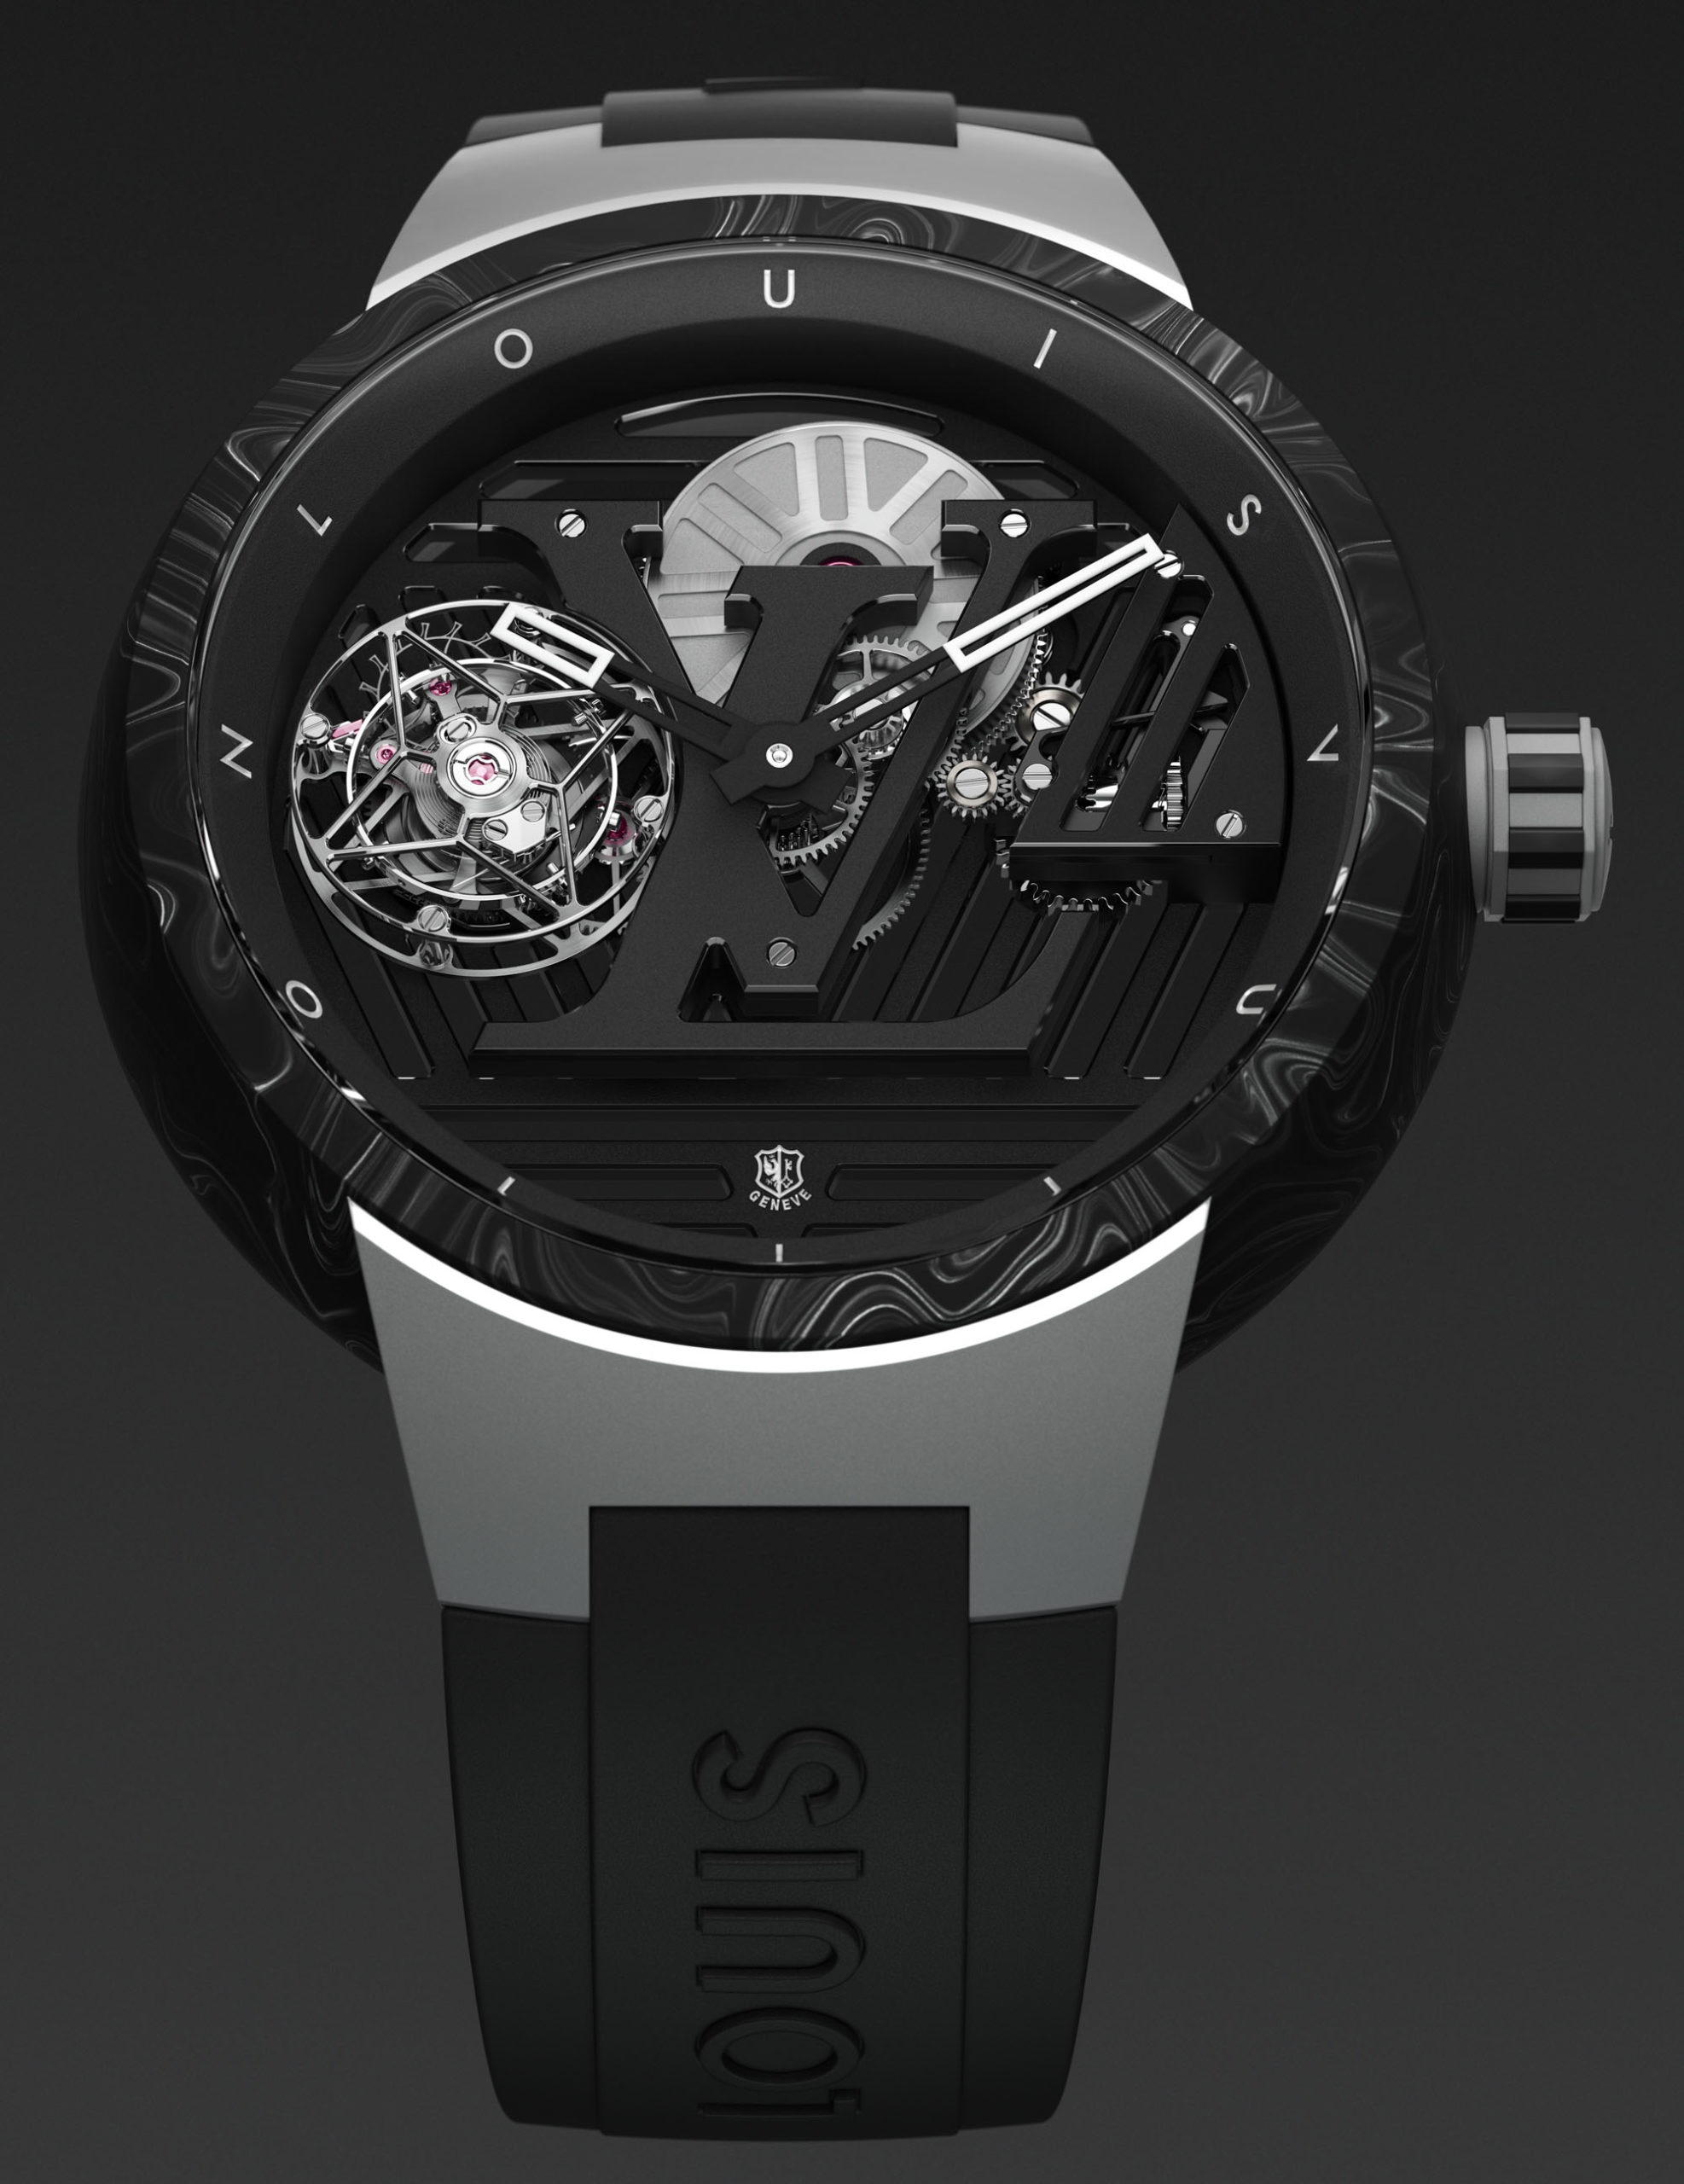 The Louis Vuitton Tambour Curve Flying Tourbillon Is A €280,000 Watch Novelty For 2020 ...